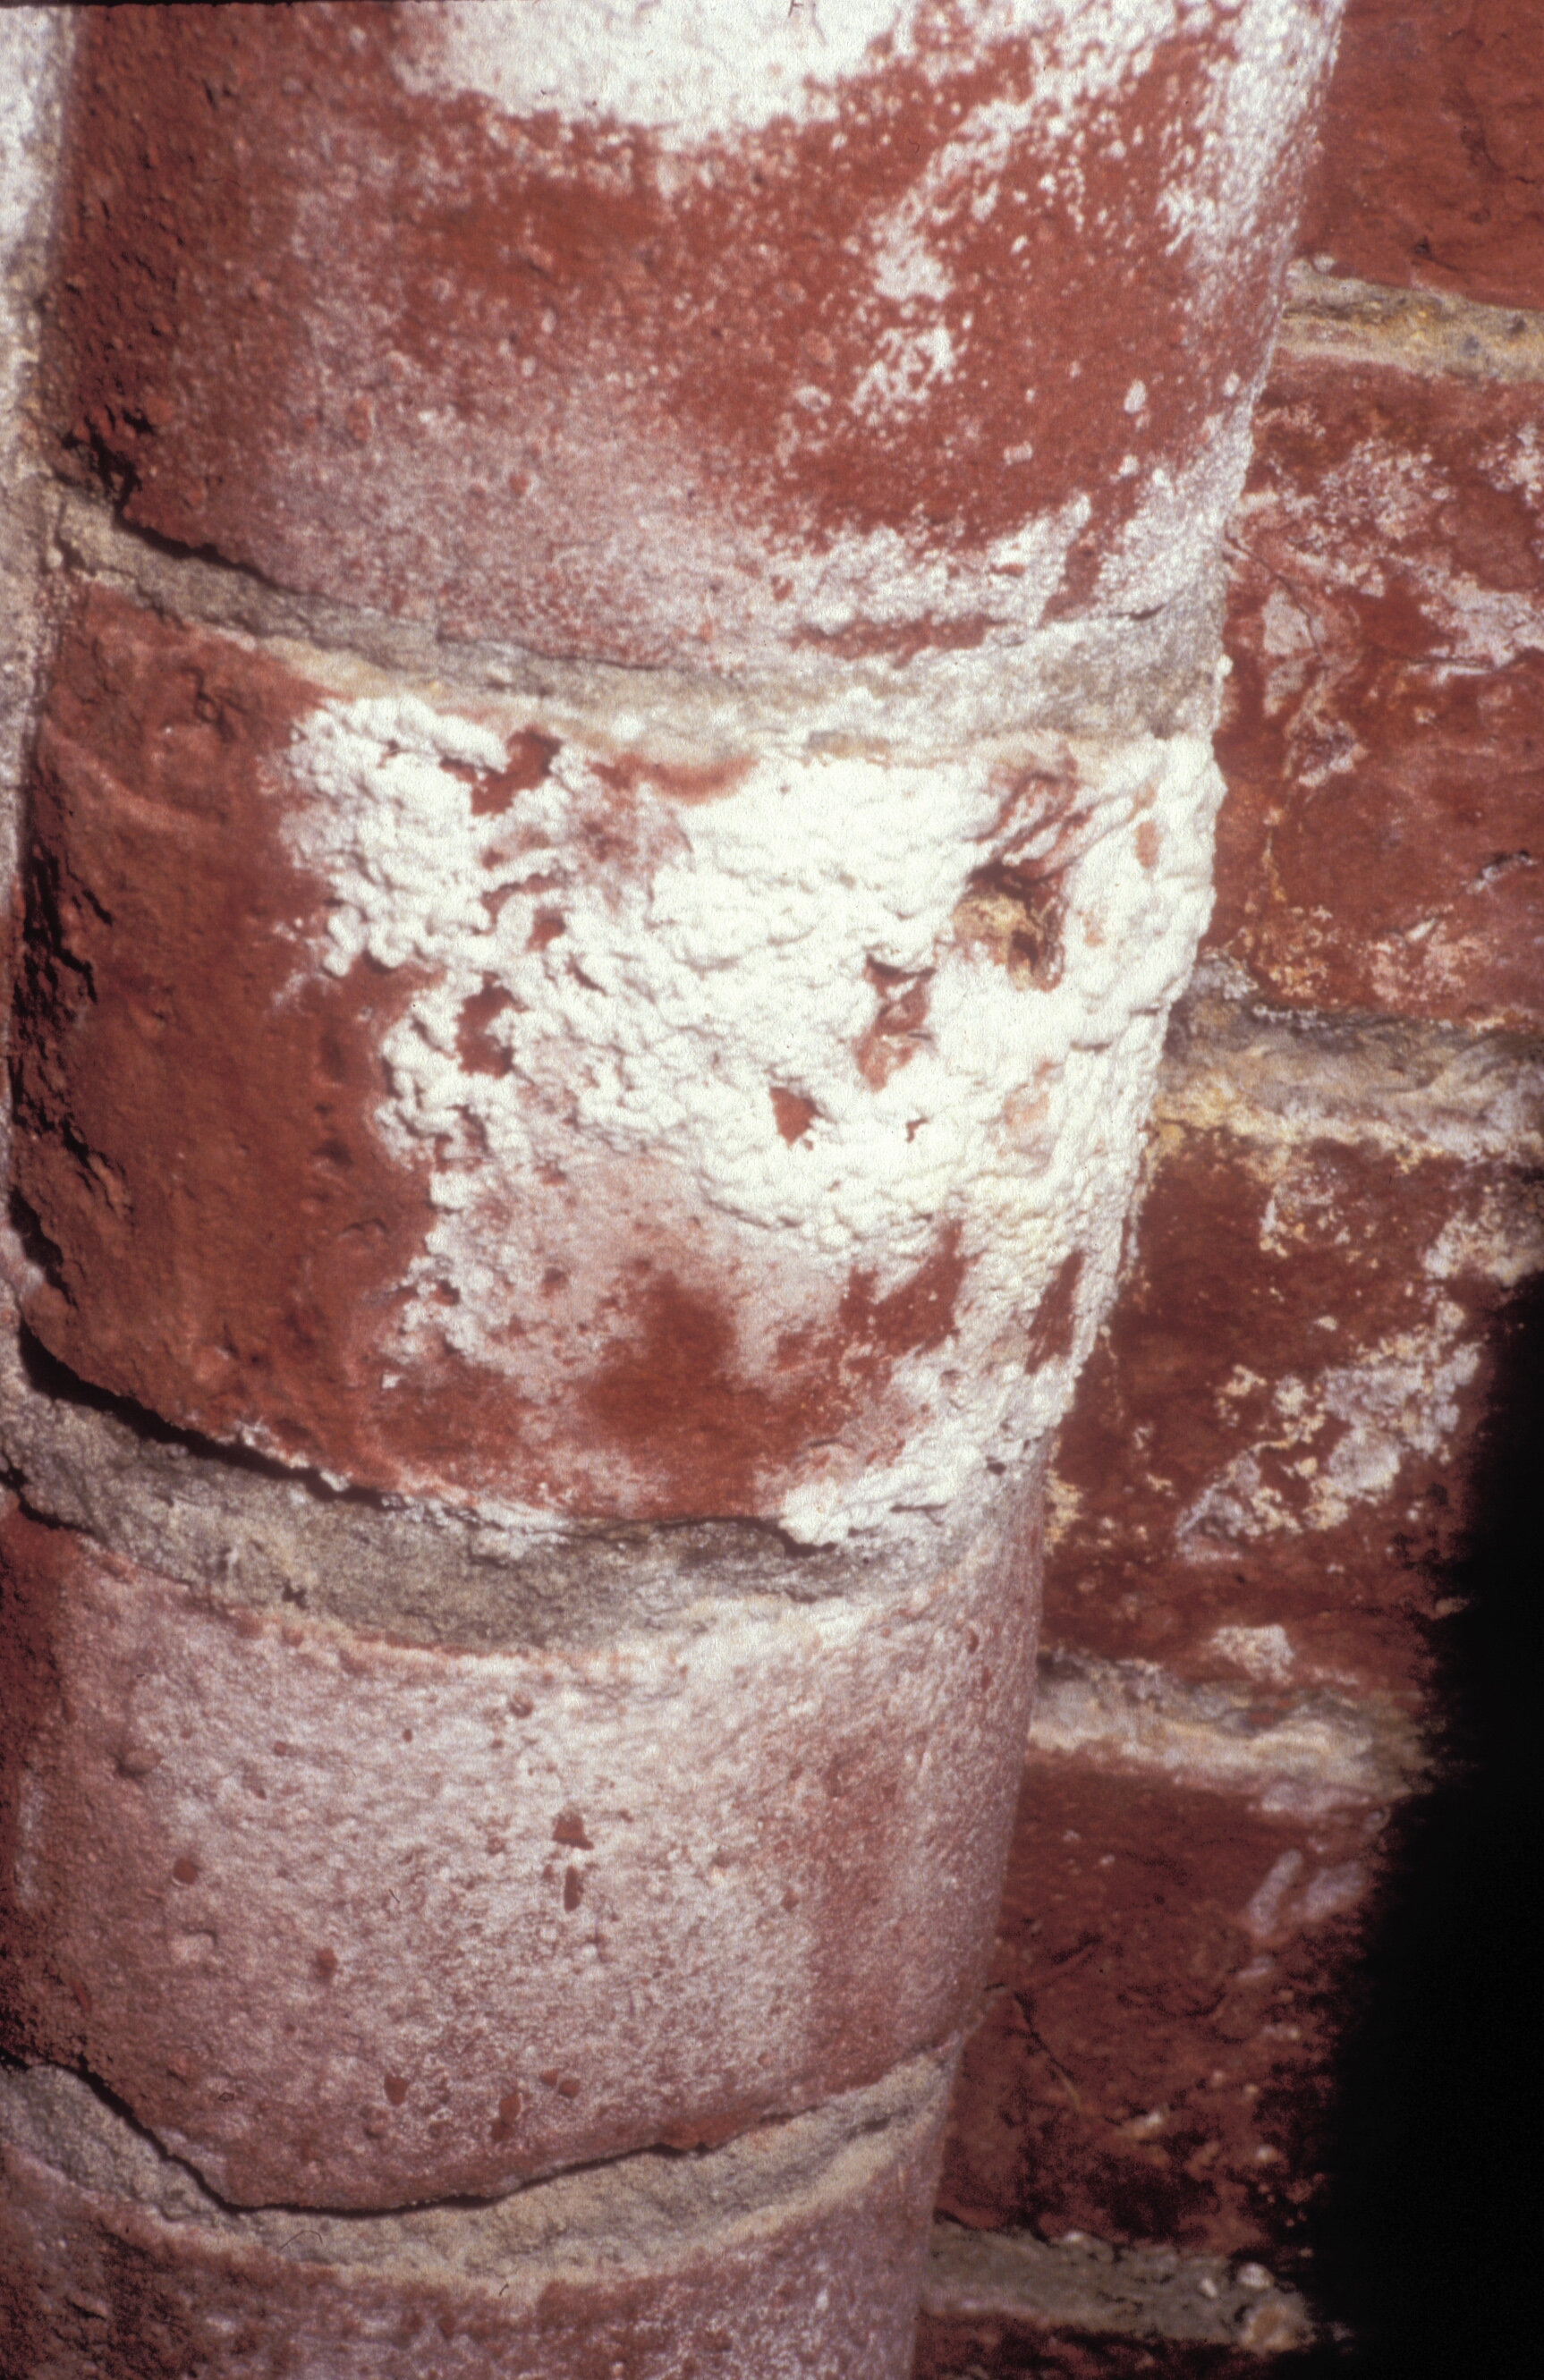 Figure 7: Encrustations on a pillar formed by carbonate salts and caused by the leaching of cement slurry injections.